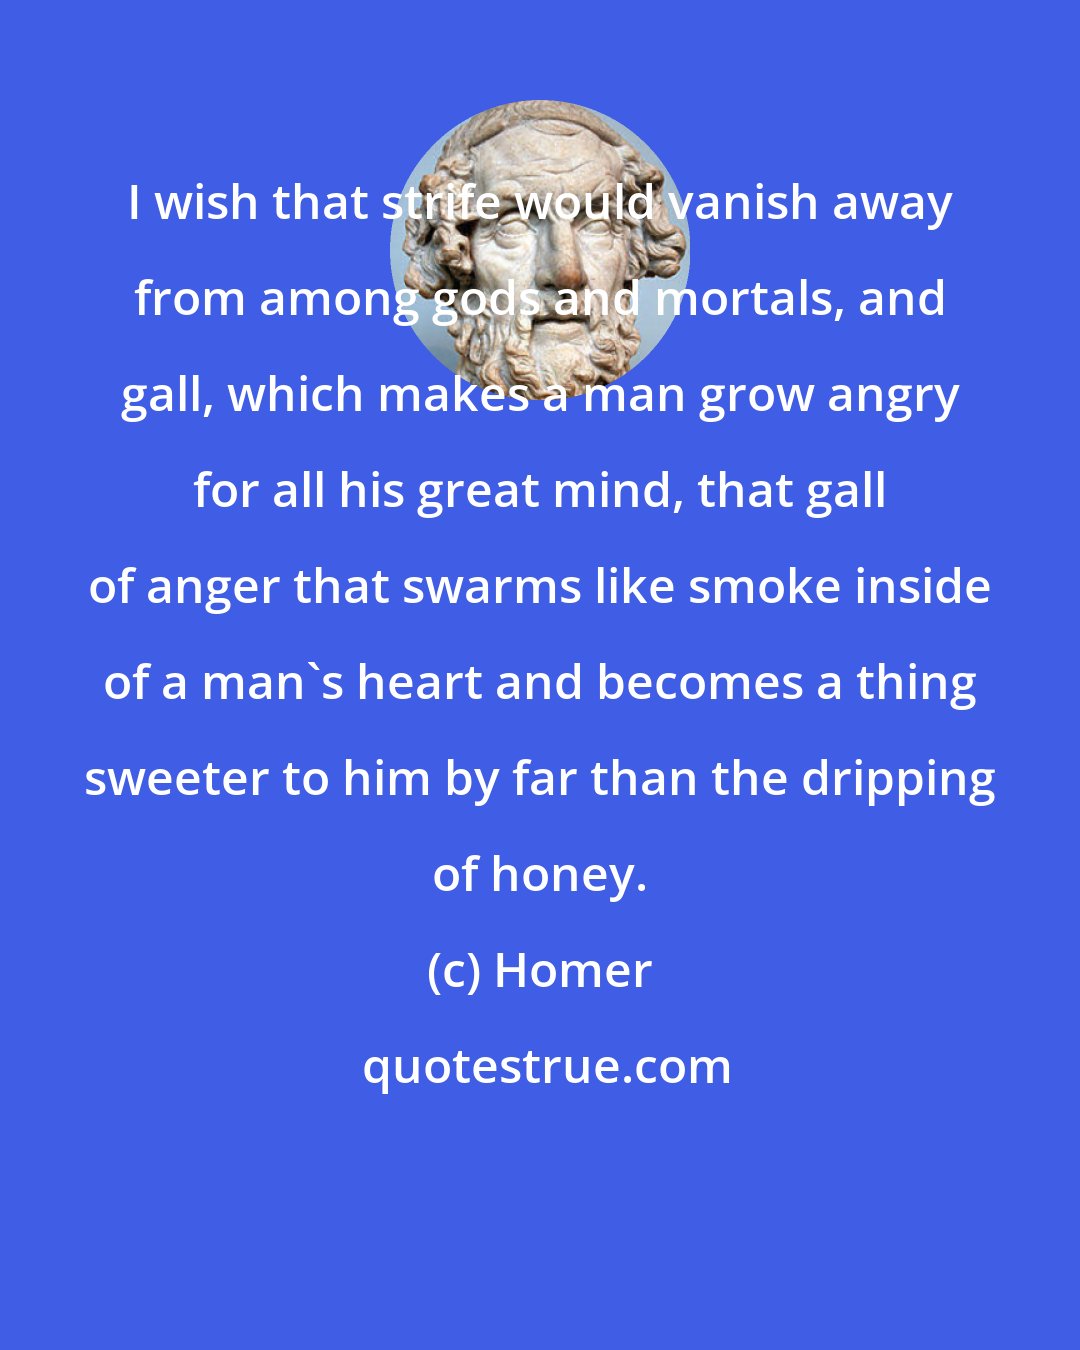 Homer: I wish that strife would vanish away from among gods and mortals, and gall, which makes a man grow angry for all his great mind, that gall of anger that swarms like smoke inside of a man's heart and becomes a thing sweeter to him by far than the dripping of honey.